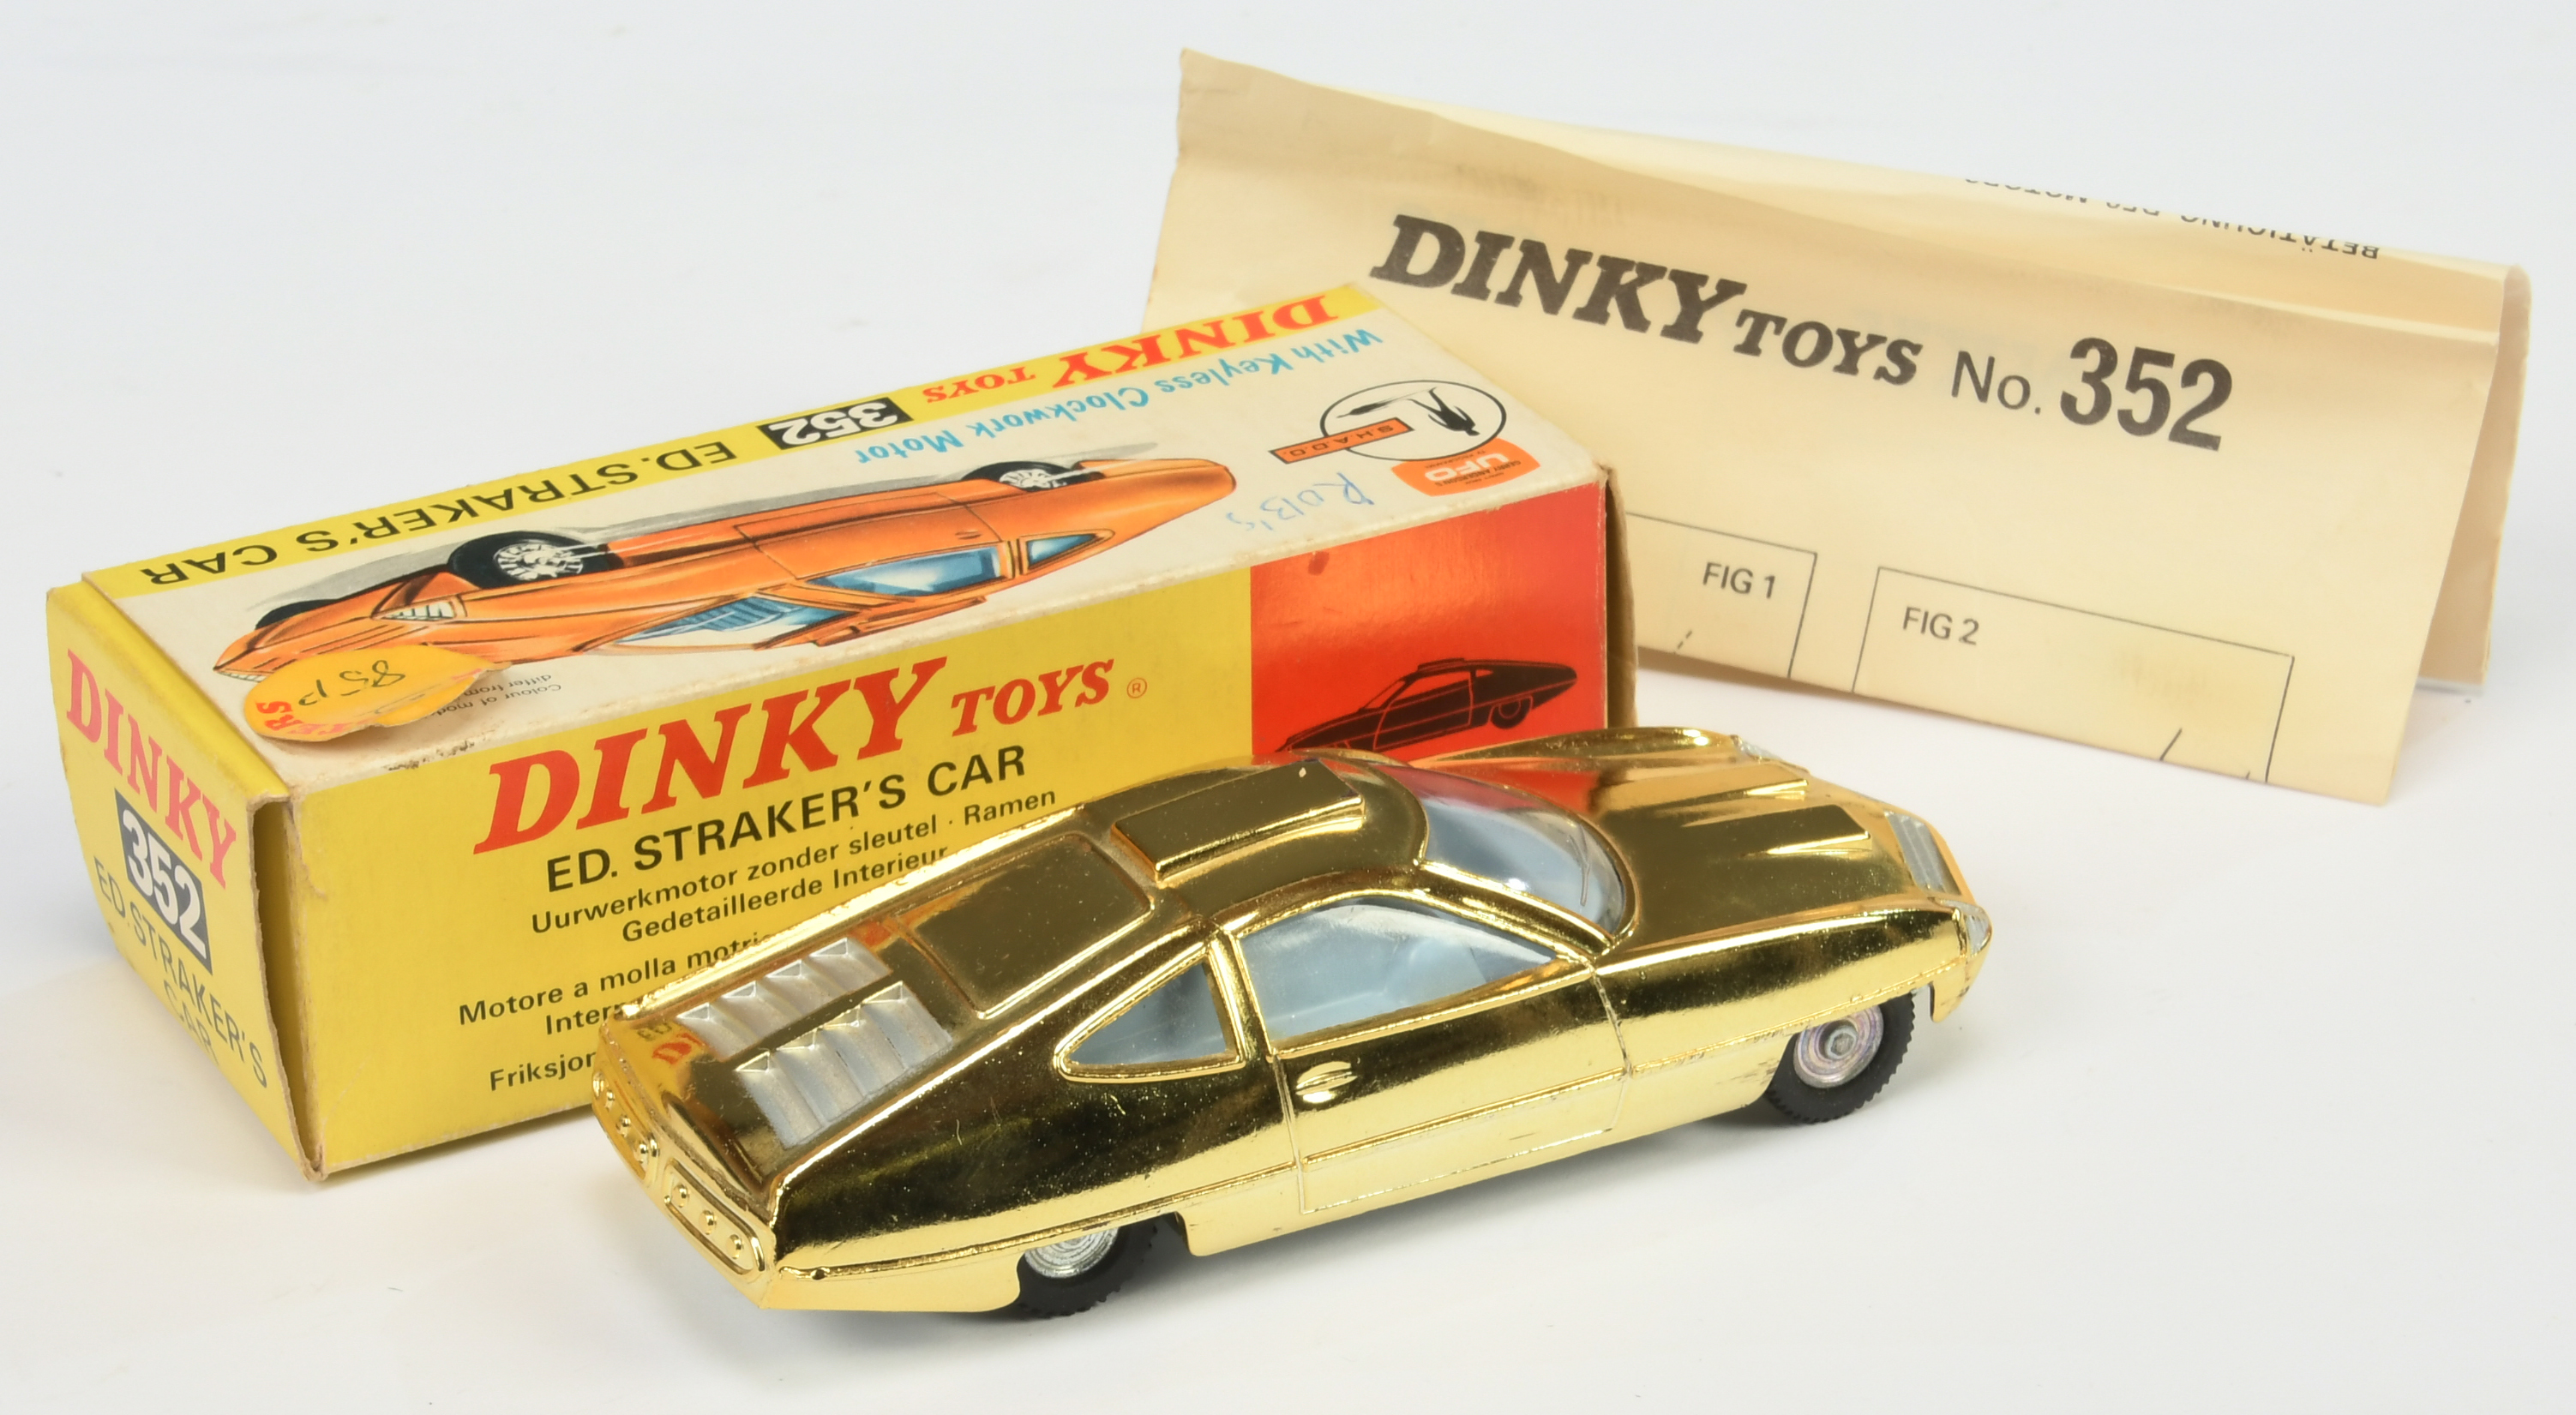 Dinky Toys 352 "UFO" Ed Straker's Car - Gold plated body,silver engine cover and trim, pale greyi... - Image 2 of 2